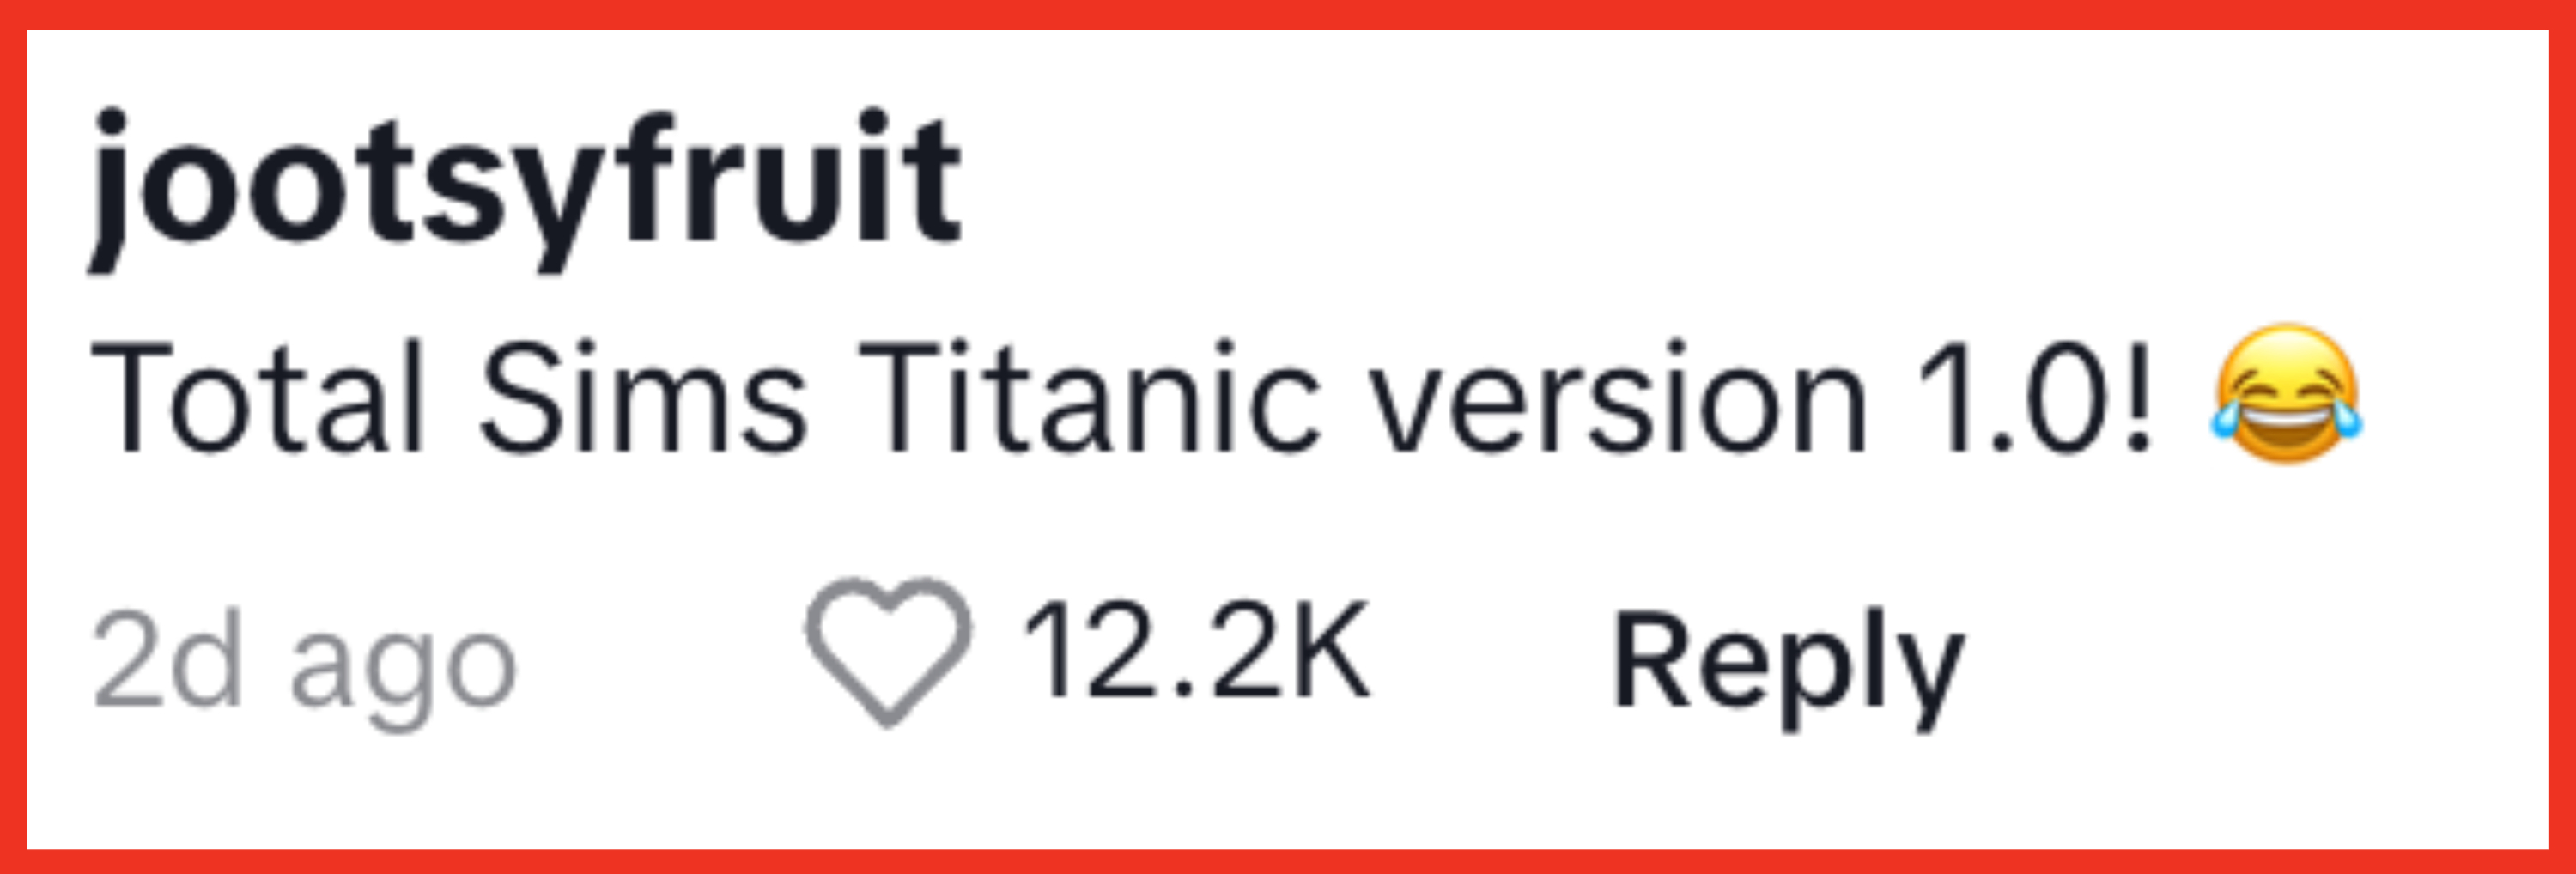 &quot;Total Sims Titanic version 1.0!&quot; and laugh-cry emoji